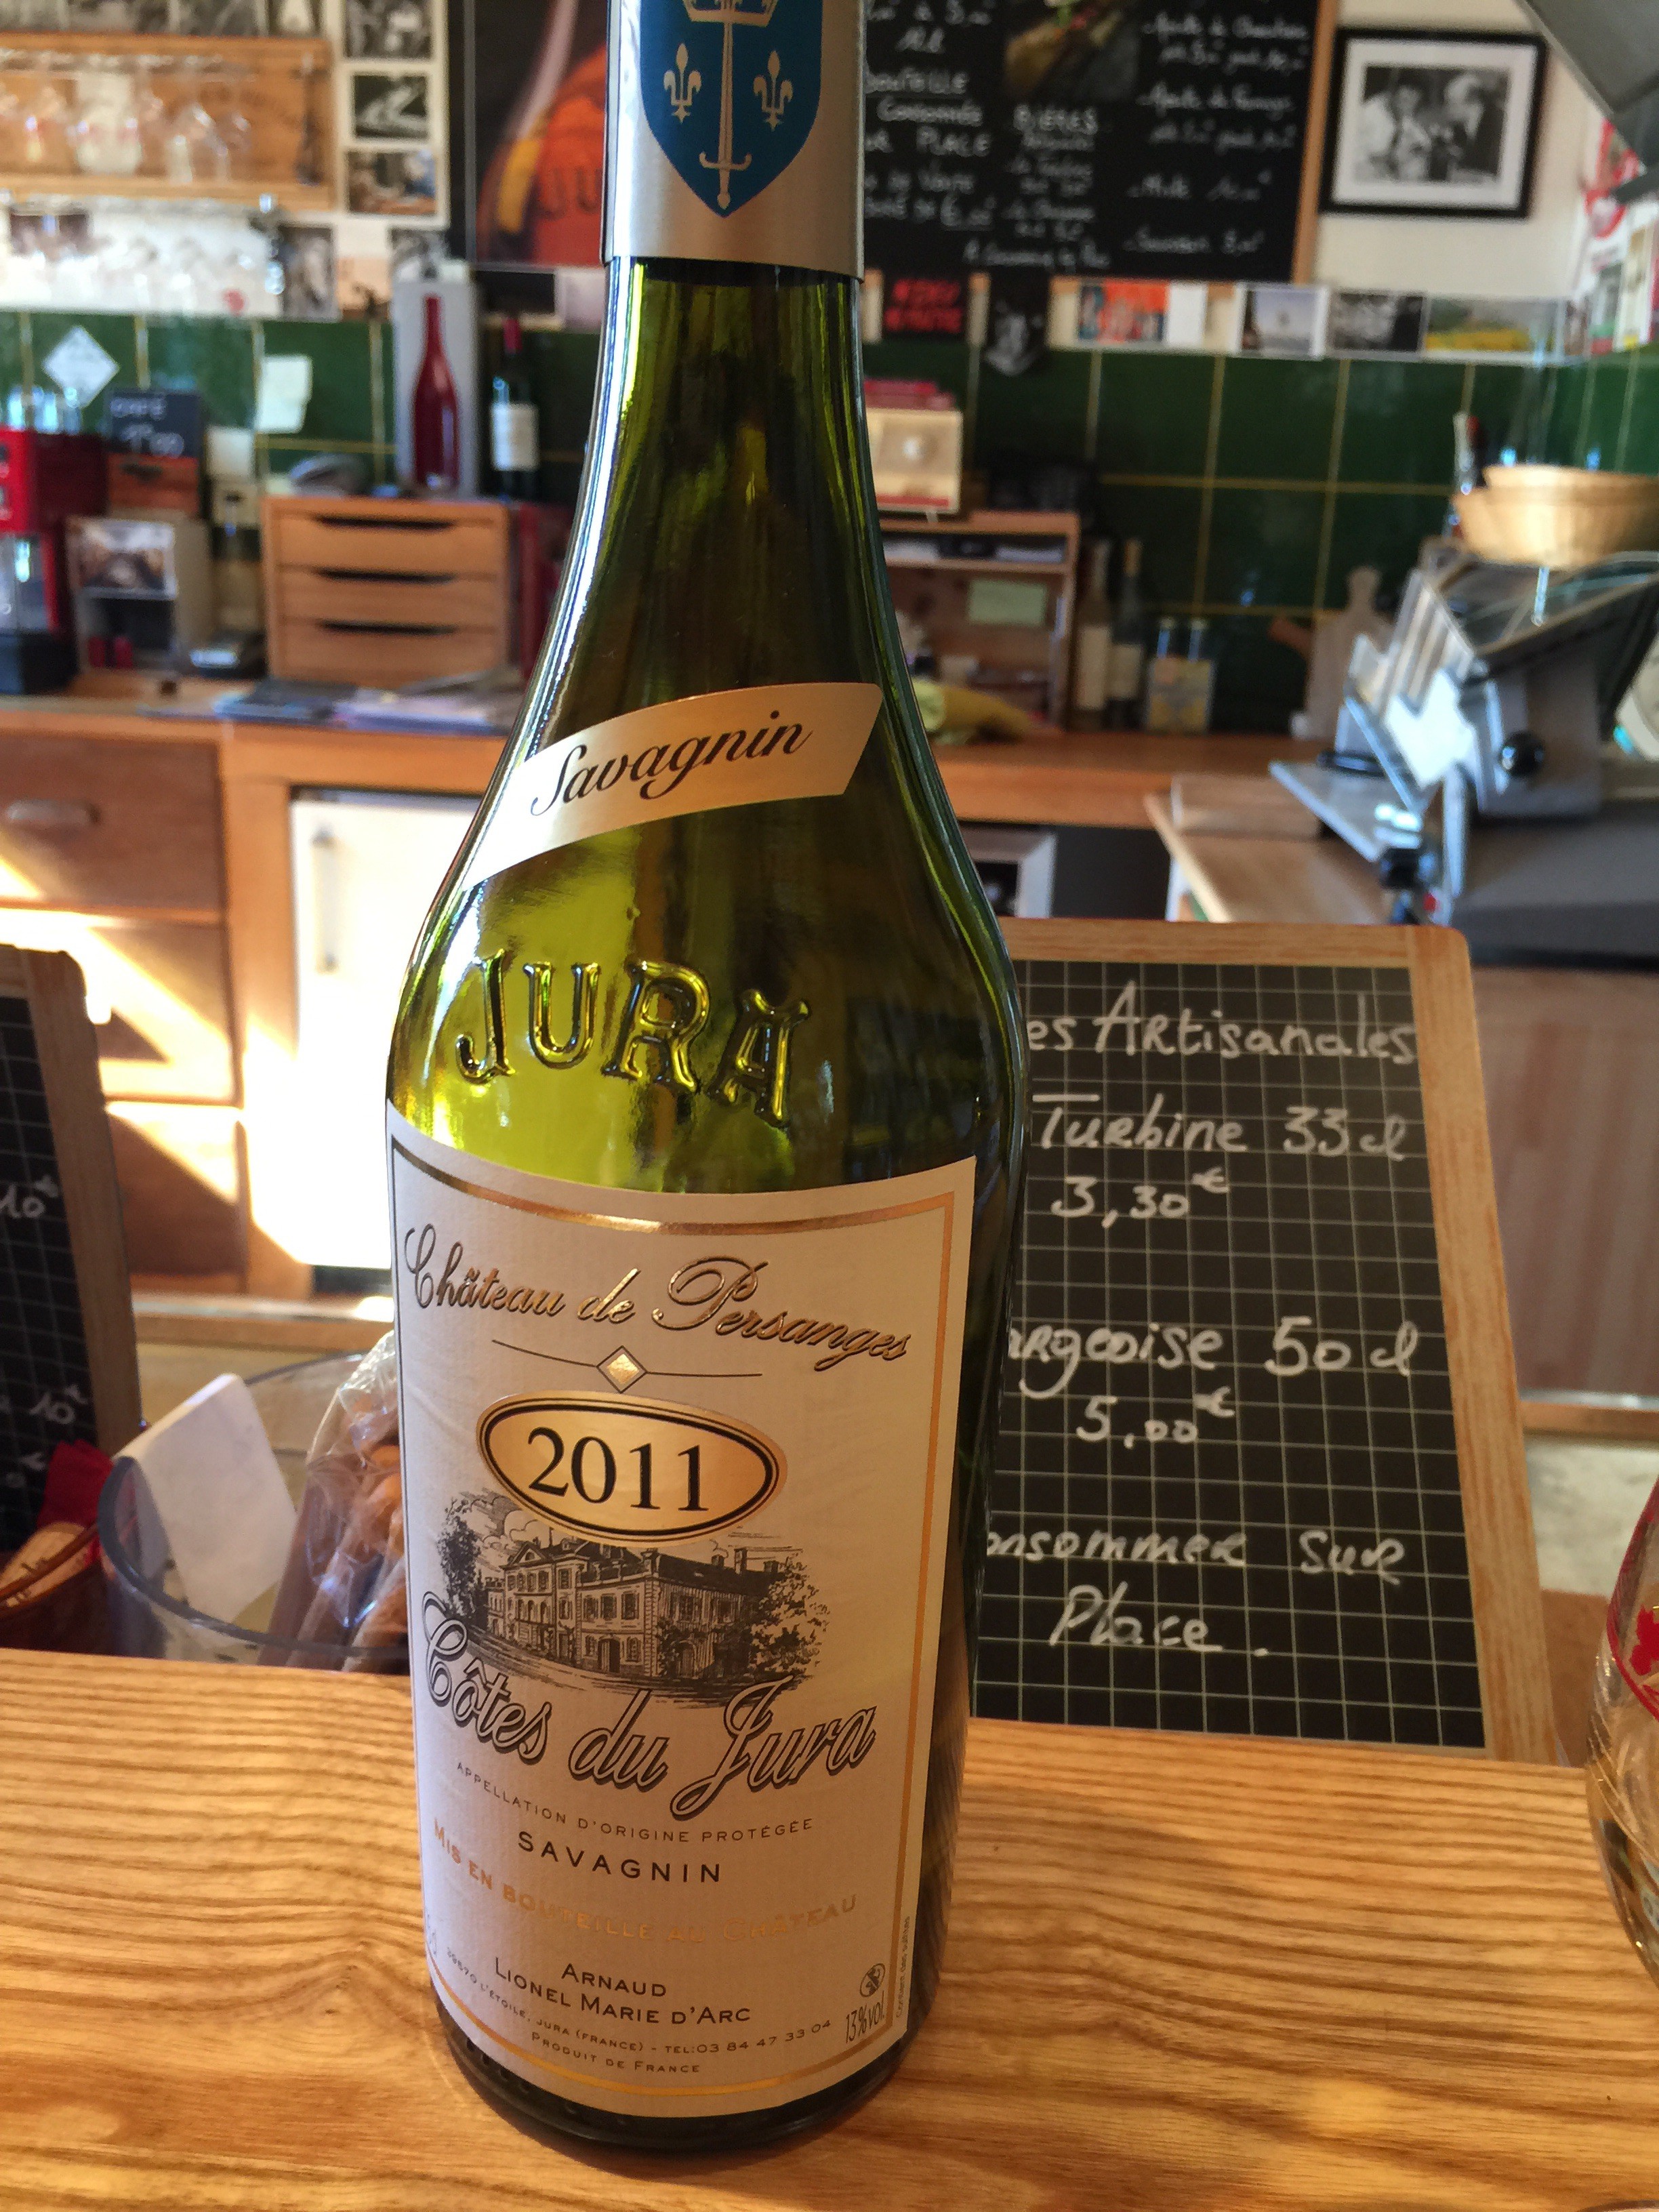  2011 Savagnin. &nbsp;A classic varietal from the Jura. &nbsp;Not to be confused with Sauvignon Blanc. 